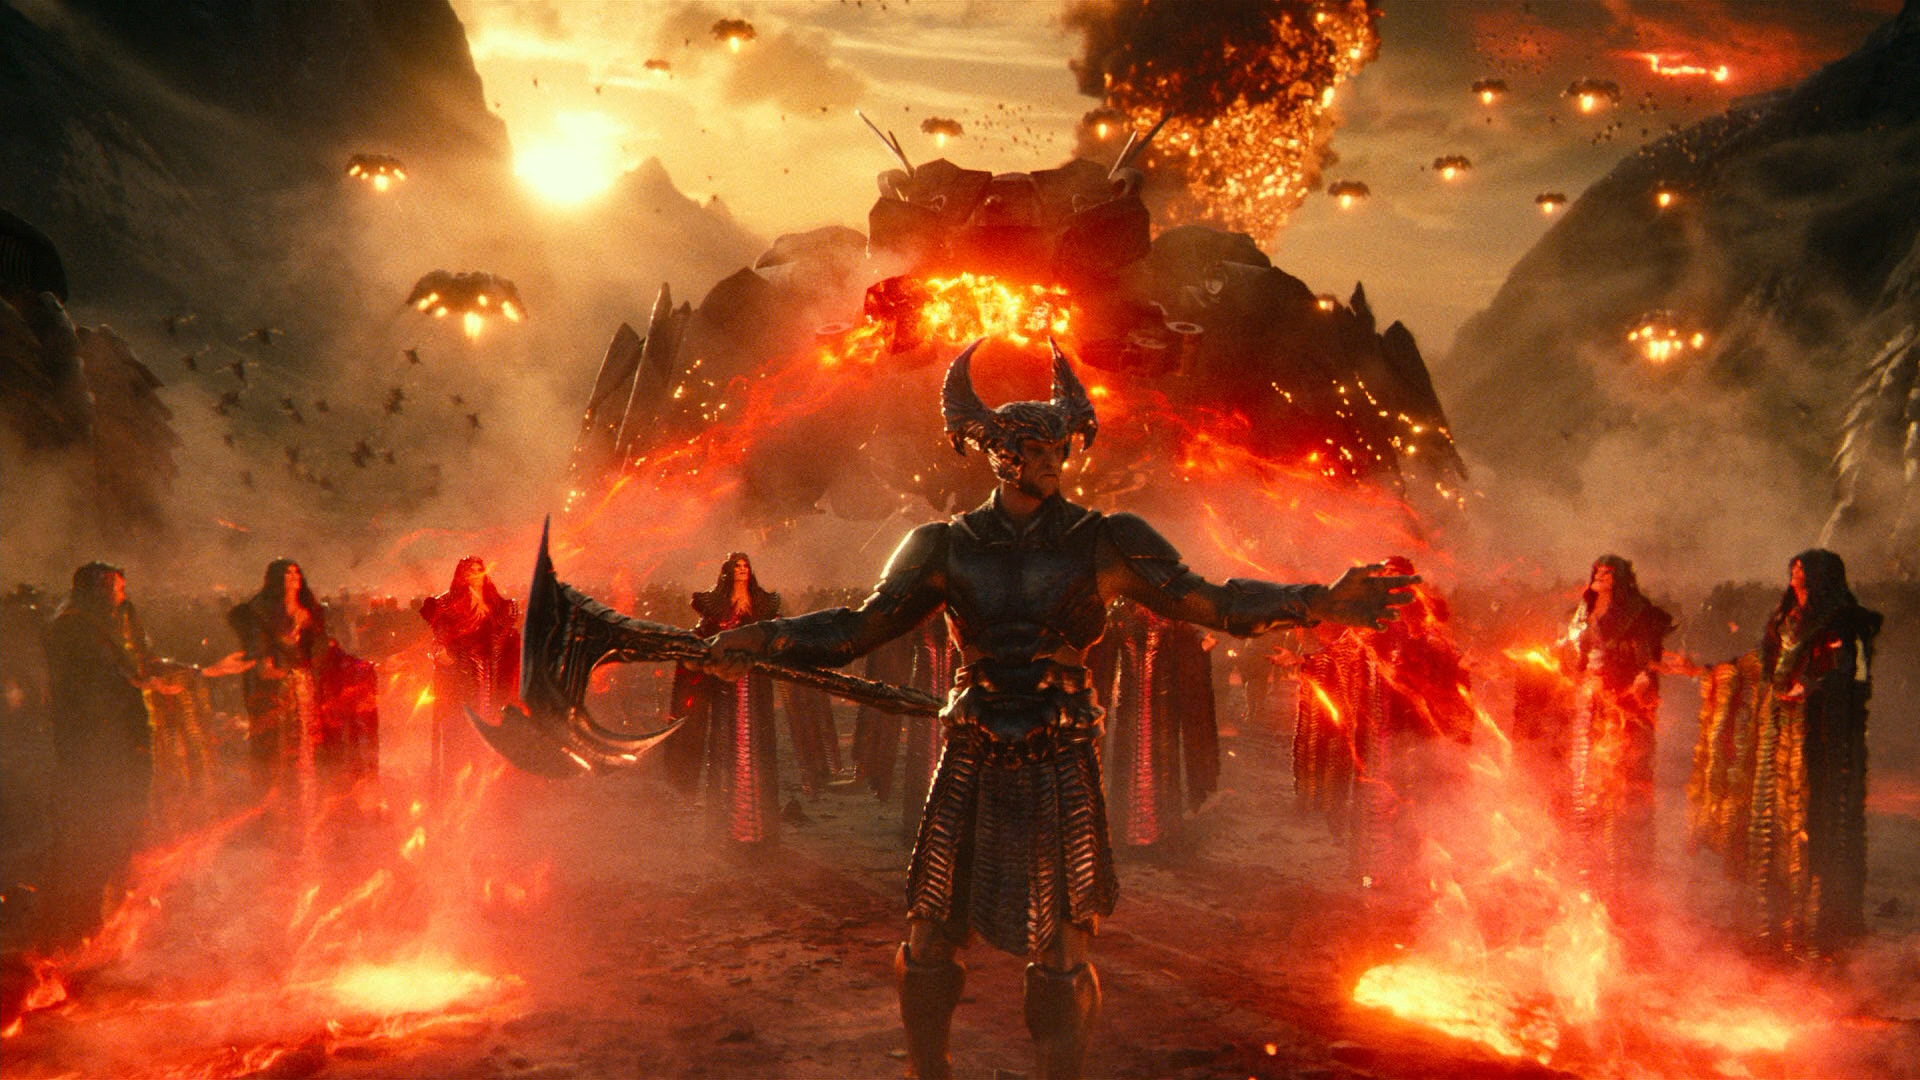 Justice League Steppenwolf wallpapers, Top free backgrounds, Epic battles, 1920x1080 Full HD Desktop